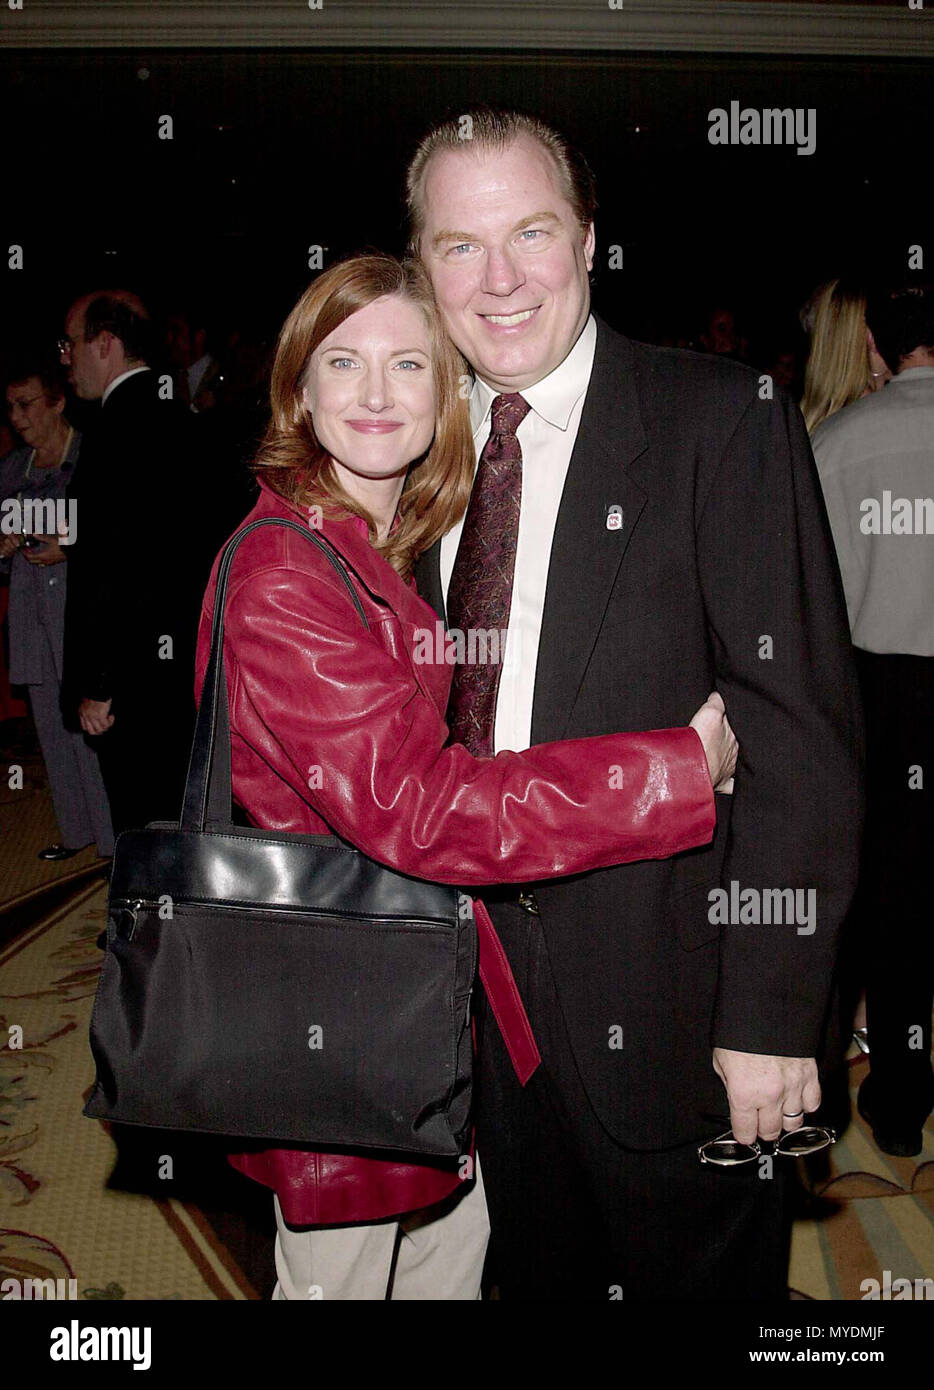 02 Oct 2000, Los Angeles, California, USA --- Original caption: Dinner of Champions - Organized by the National Multiple Sclerosis Society at the Century Plaza. --- Image by © . / USAMichael McKean and Annette O'Toole Red Carpet Event, Vertical, USA, Film Industry, Celebrities,  Photography, Bestof, Arts Culture and Entertainment, Topix Celebrities fashion /  Vertical, Best of, Event in Hollywood Life - California,  Red Carpet and backstage, USA, Film Industry, Celebrities,  movie celebrities, TV celebrities, Music celebrities, Photography, Bestof, Arts Culture and Entertainment,  Topix,  vert Stock Photo